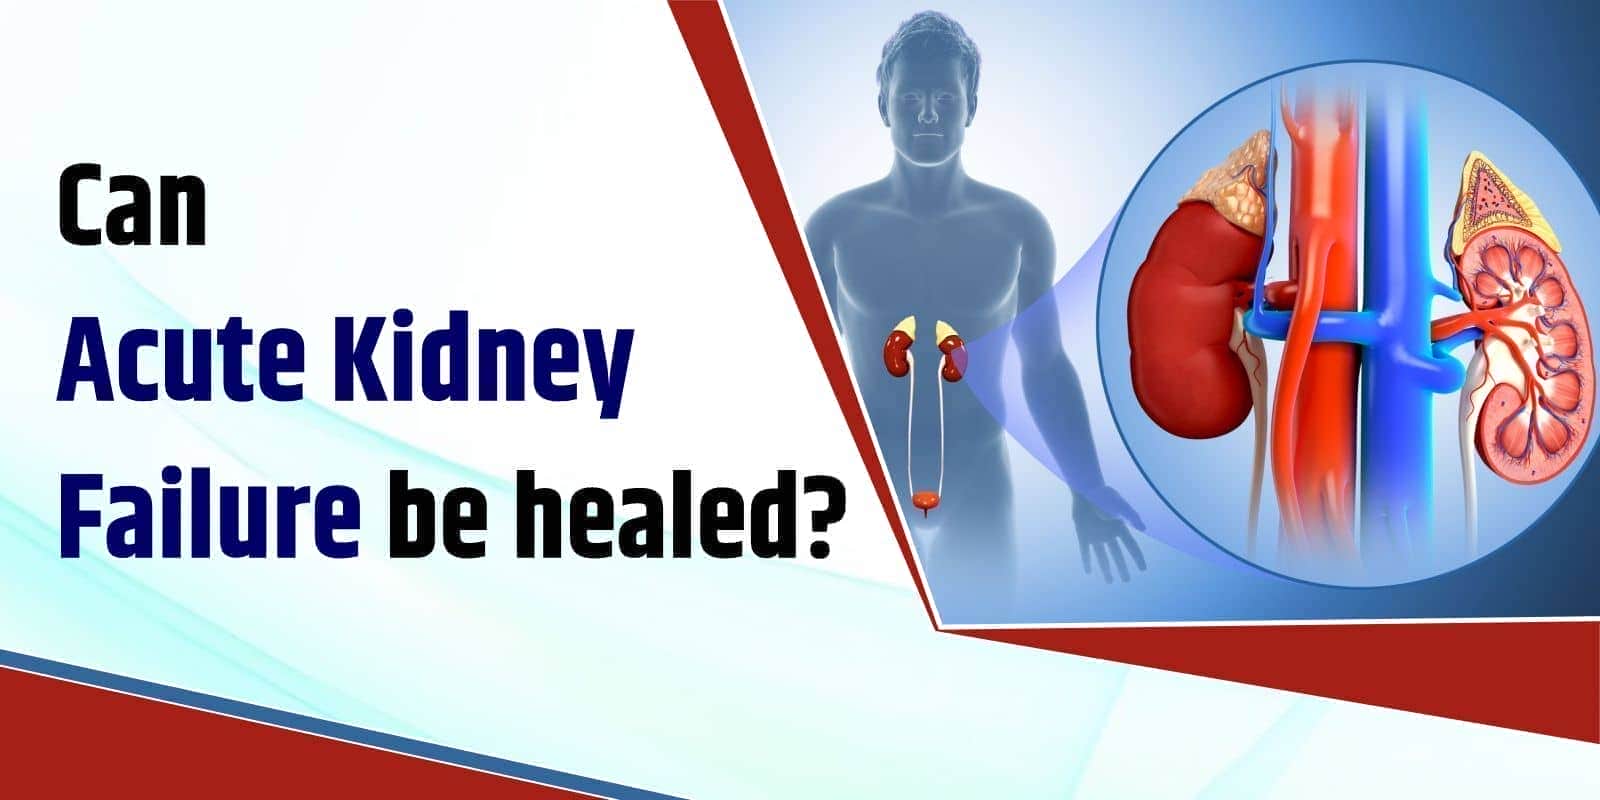 Can Acute Kidney Failure be healed?